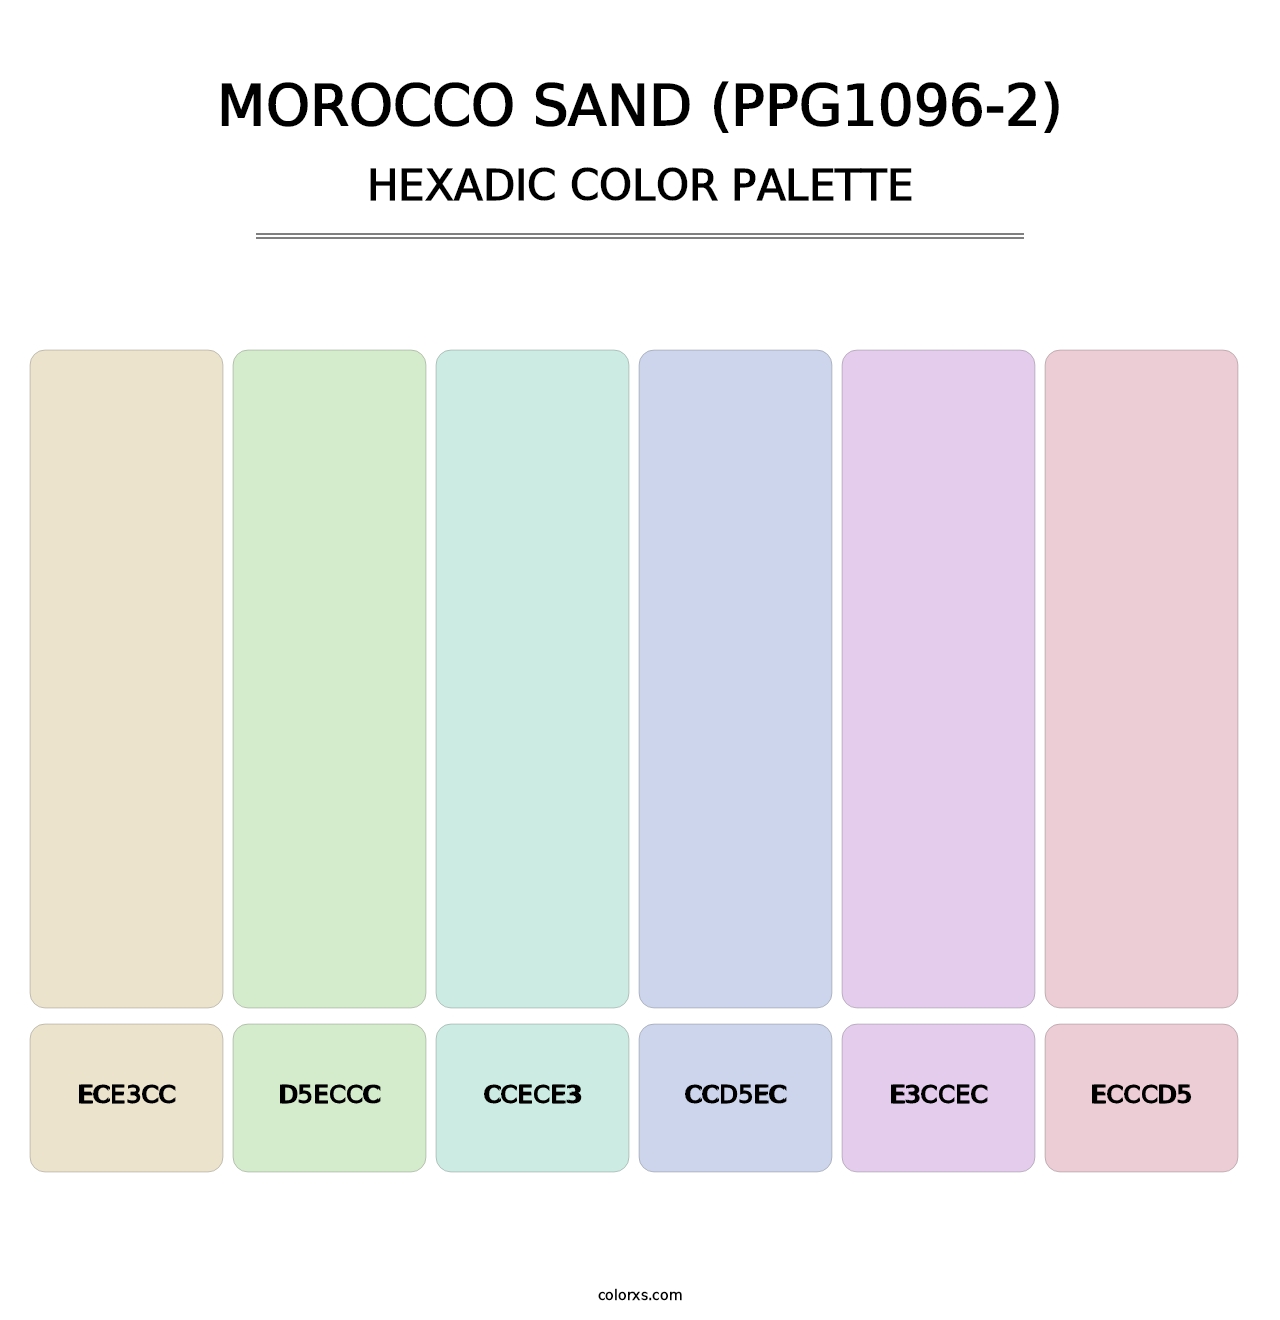 Morocco Sand (PPG1096-2) - Hexadic Color Palette